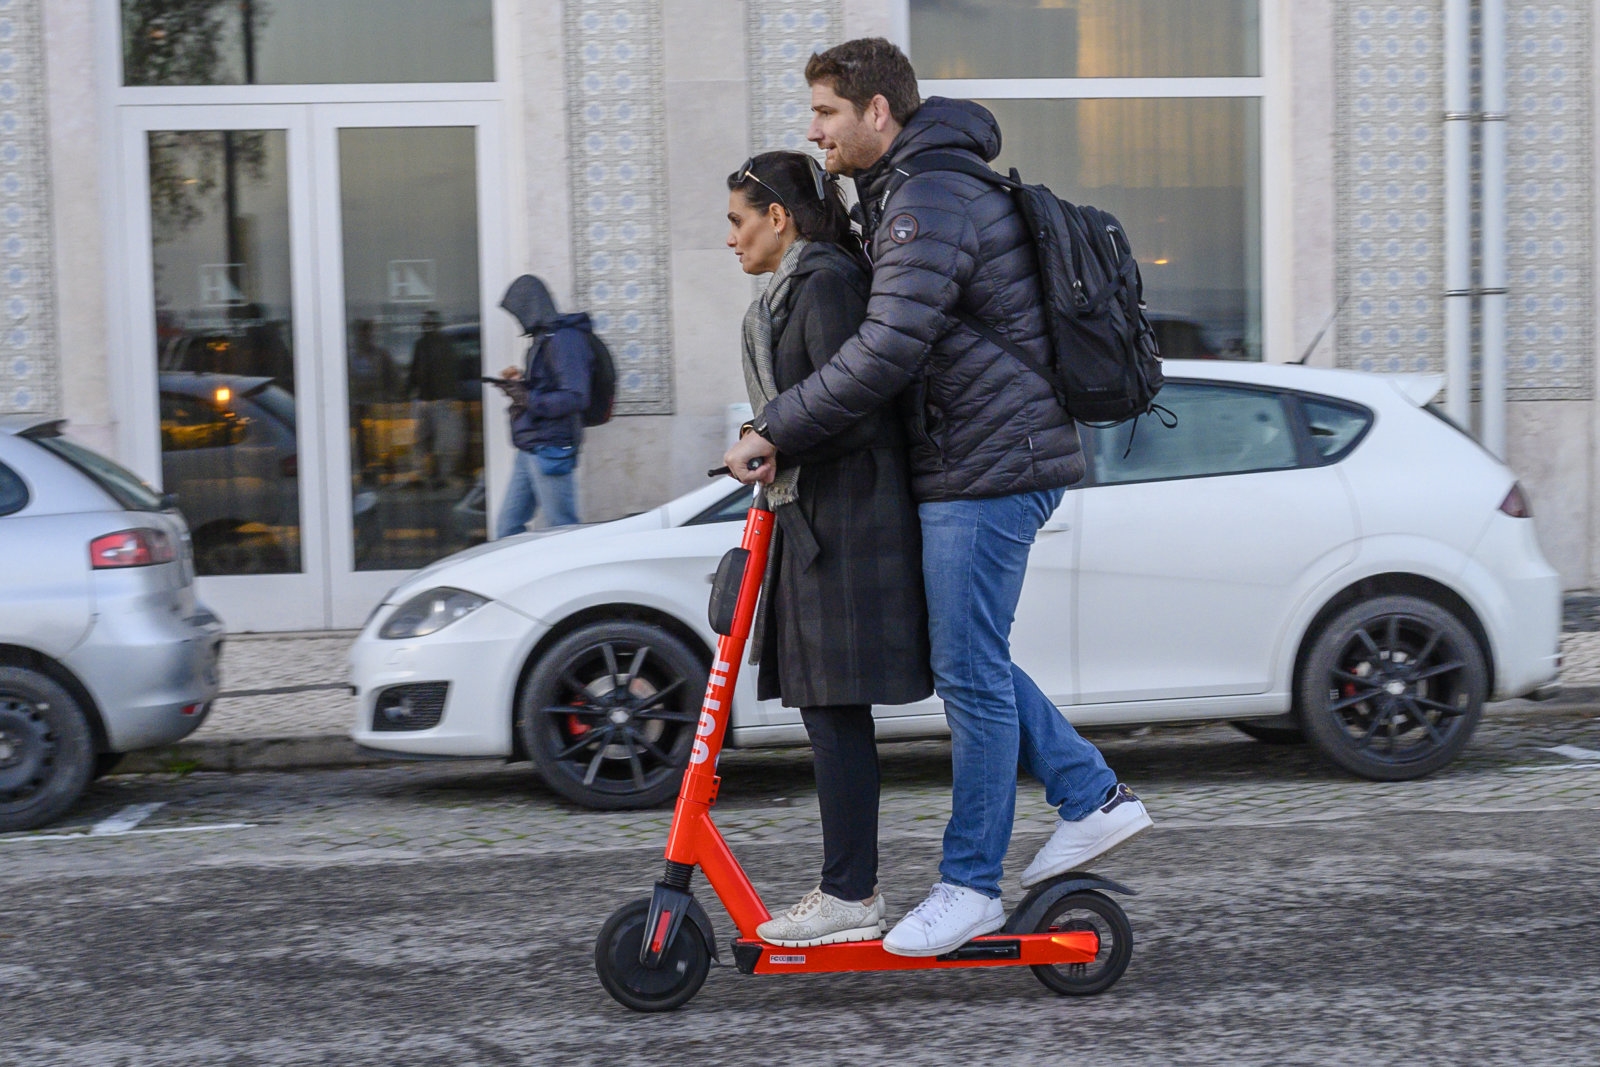 E-scooter injuries quadrupled in four years | DeviceDaily.com